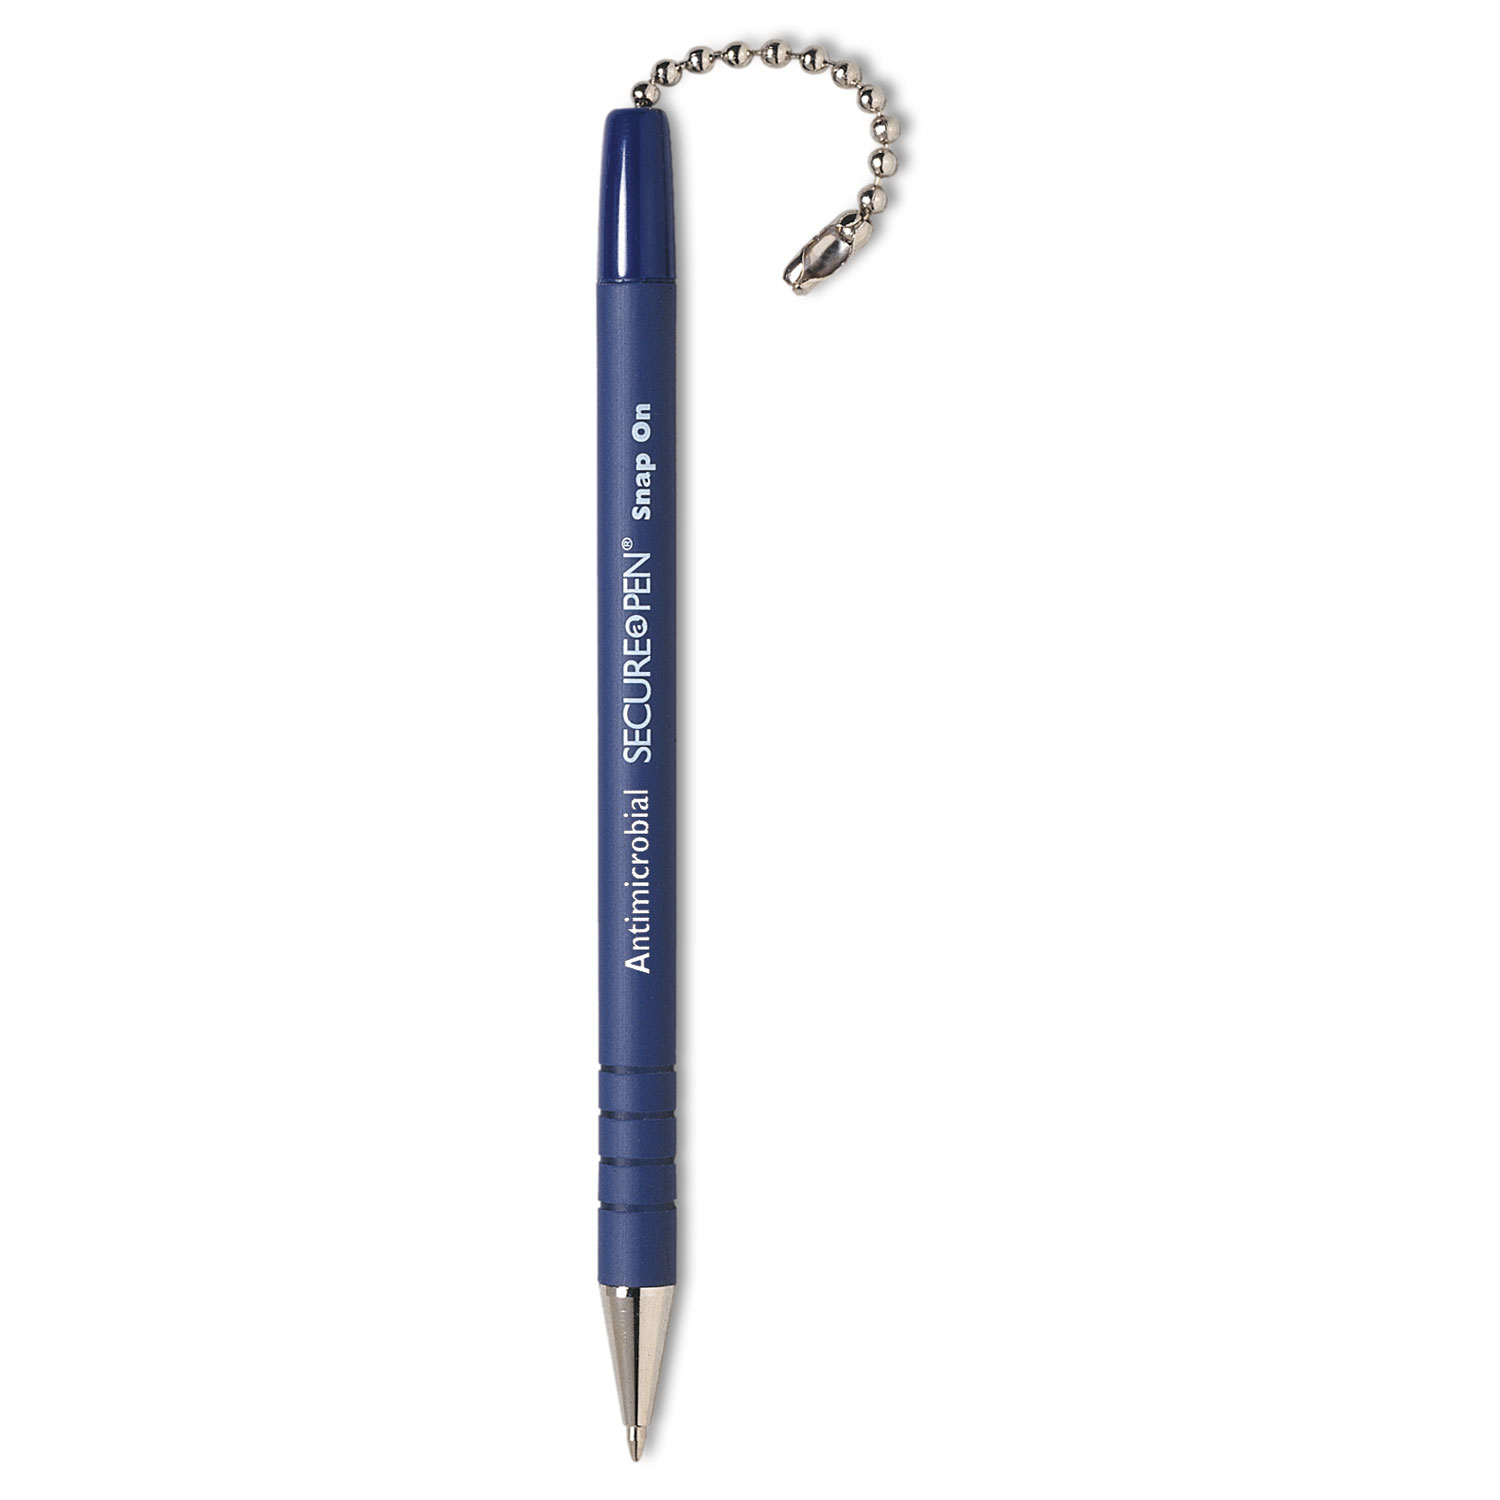  MMF Industries 28708 Replacement Ballpoint Pen for the Secure-A-Pen System, 1mm, Blue Ink/Barrel (MMF28708) 